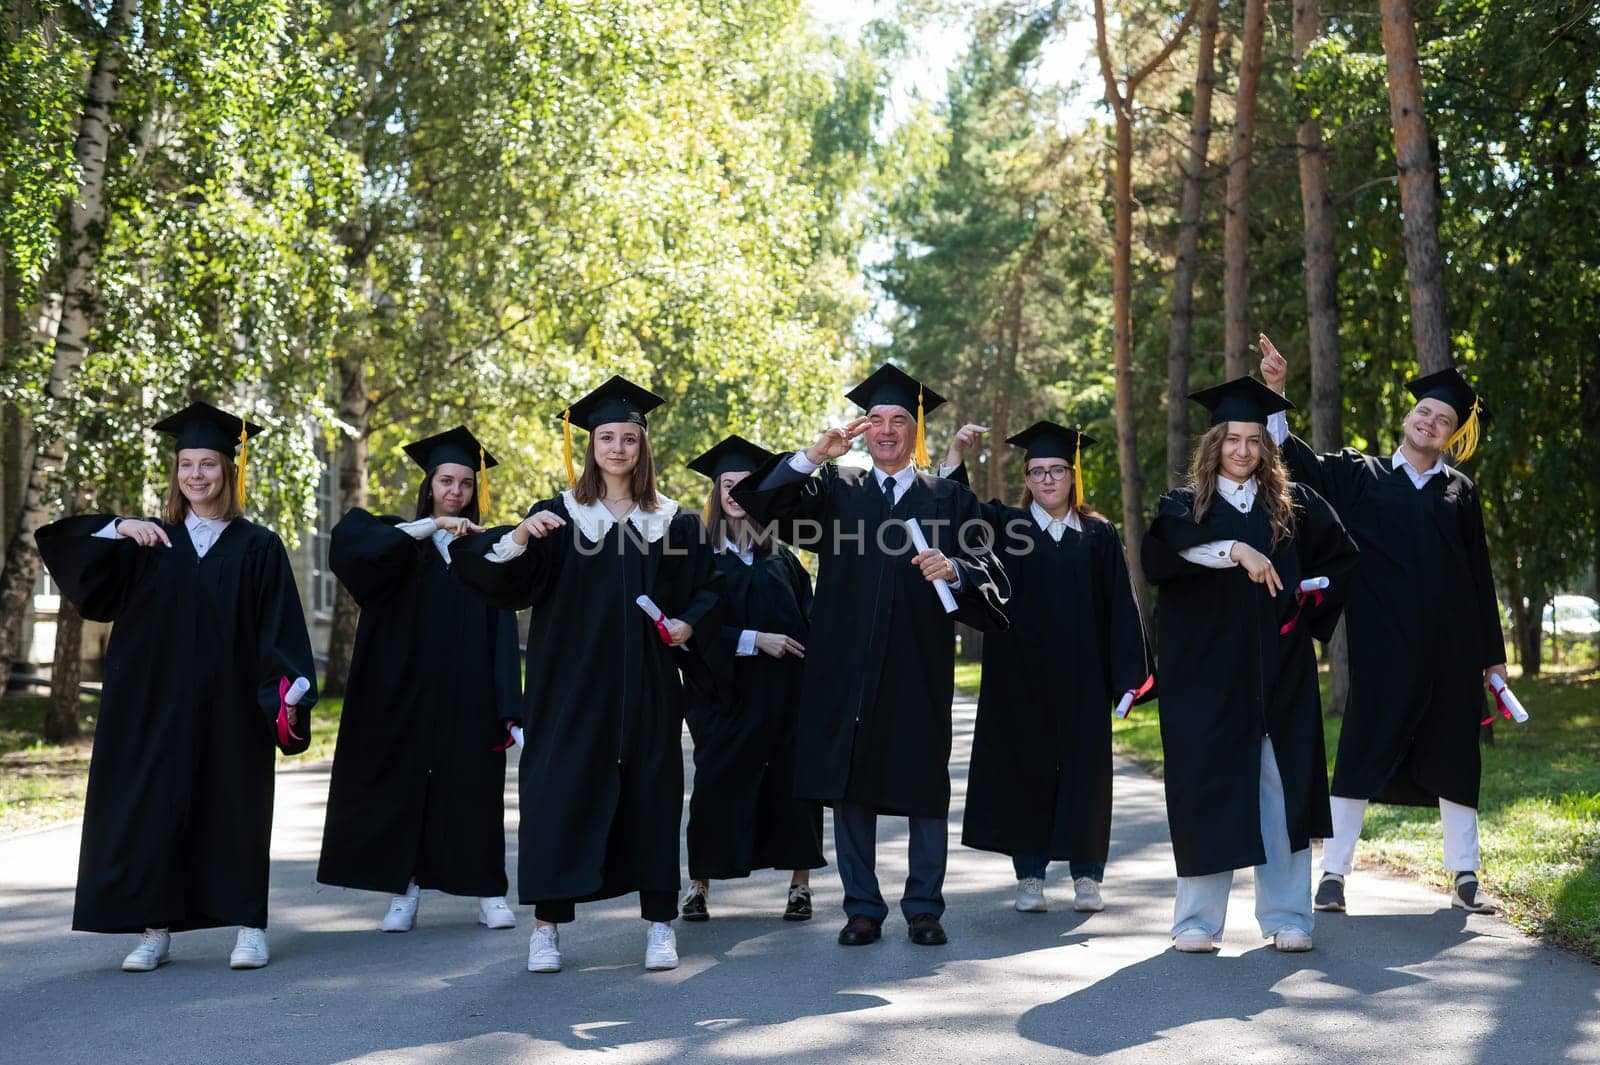 Group of graduates in robes dancing outdoors. Elderly student. by mrwed54